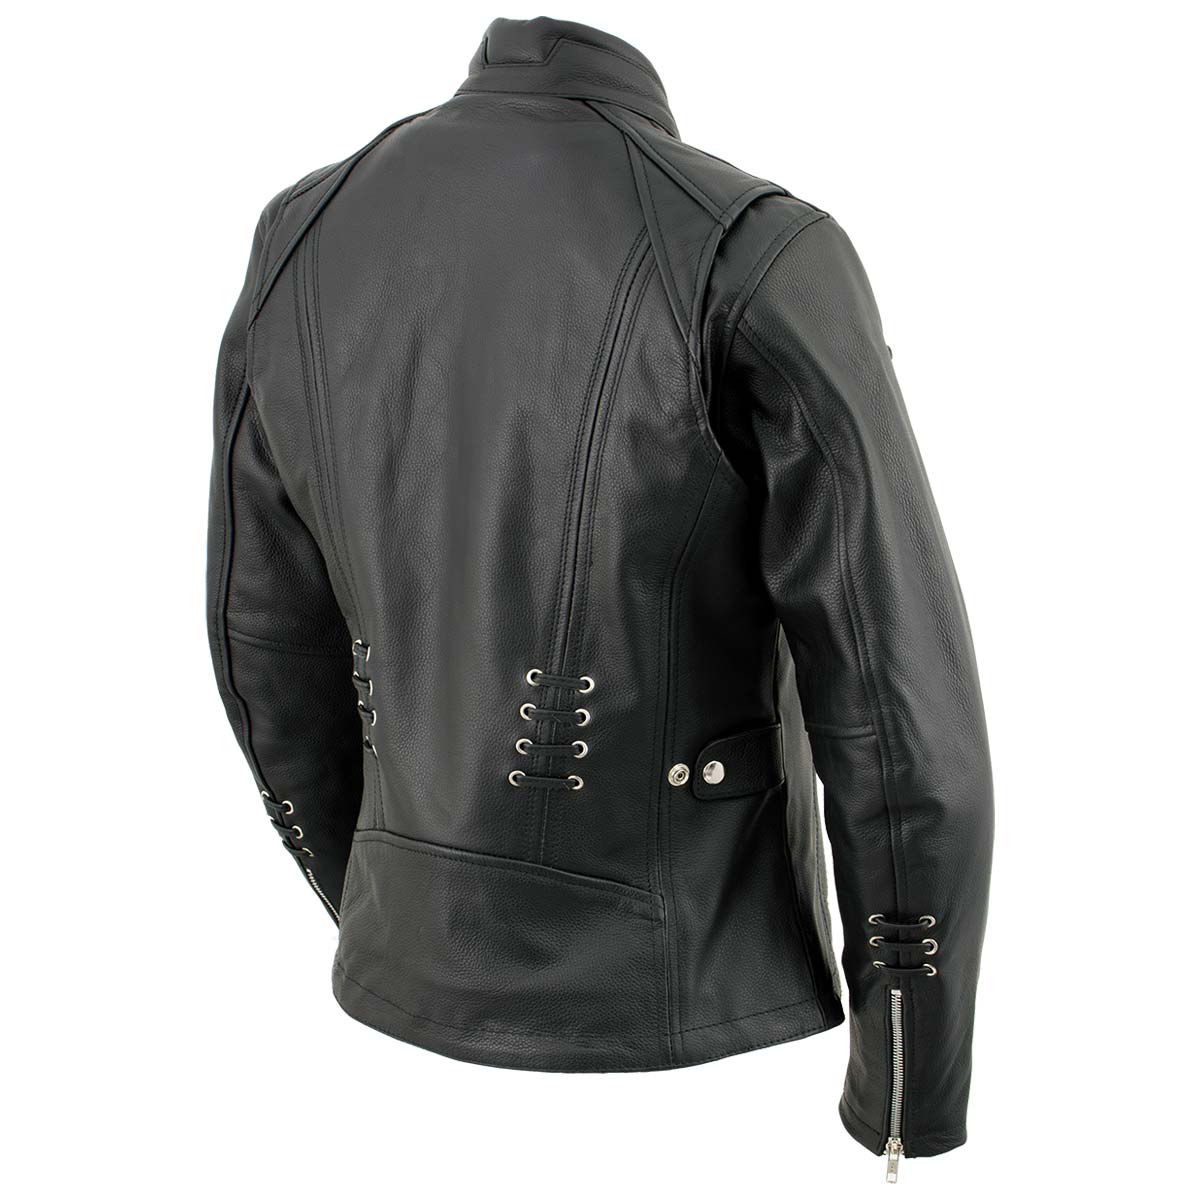 Xelement XS631 Women's 'Raven' Black Premium Cowhide Motorcycle Rider Leather Jacket with Zip-Out Liner